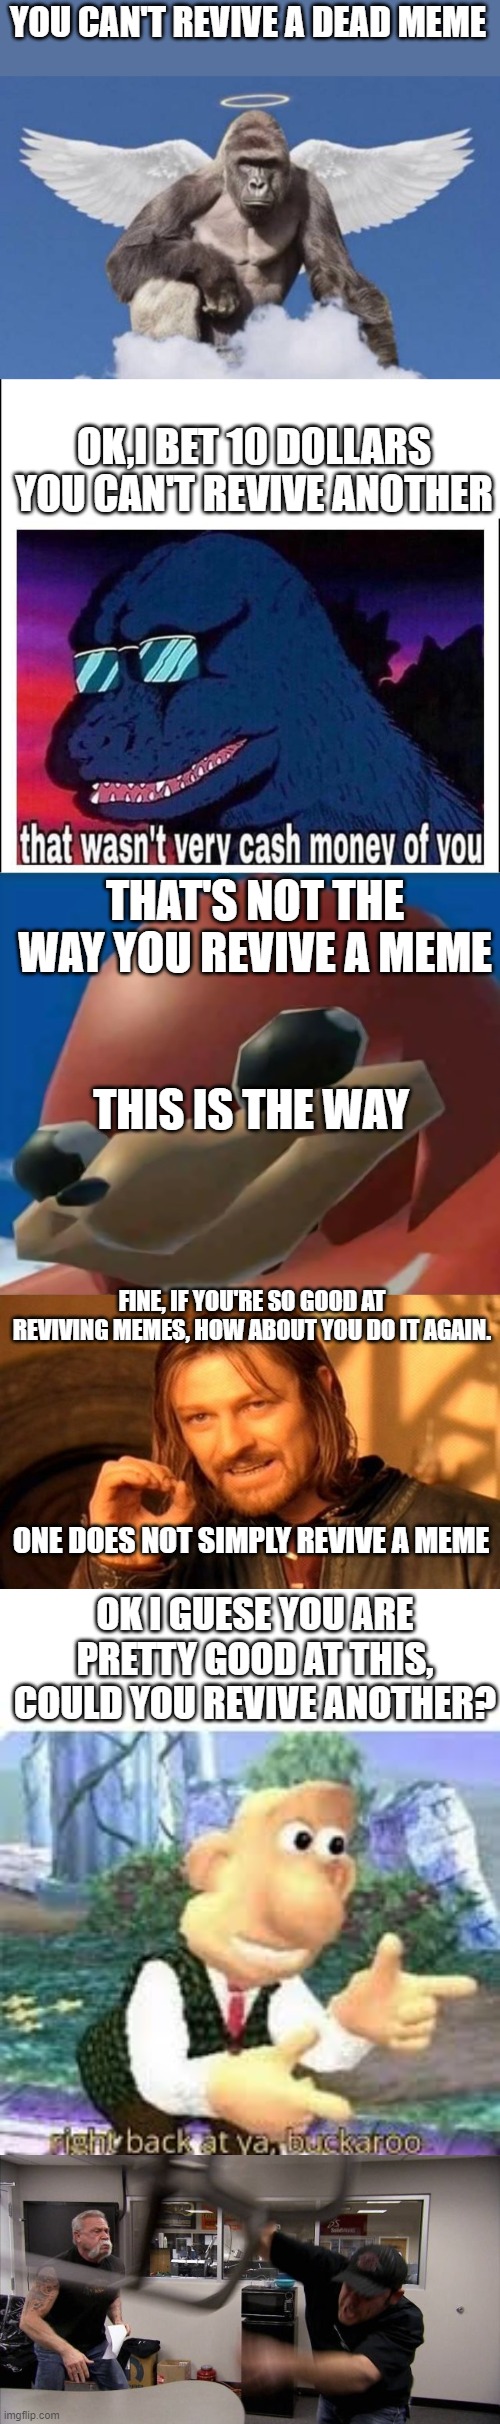 Here's how you can make memes, and money too